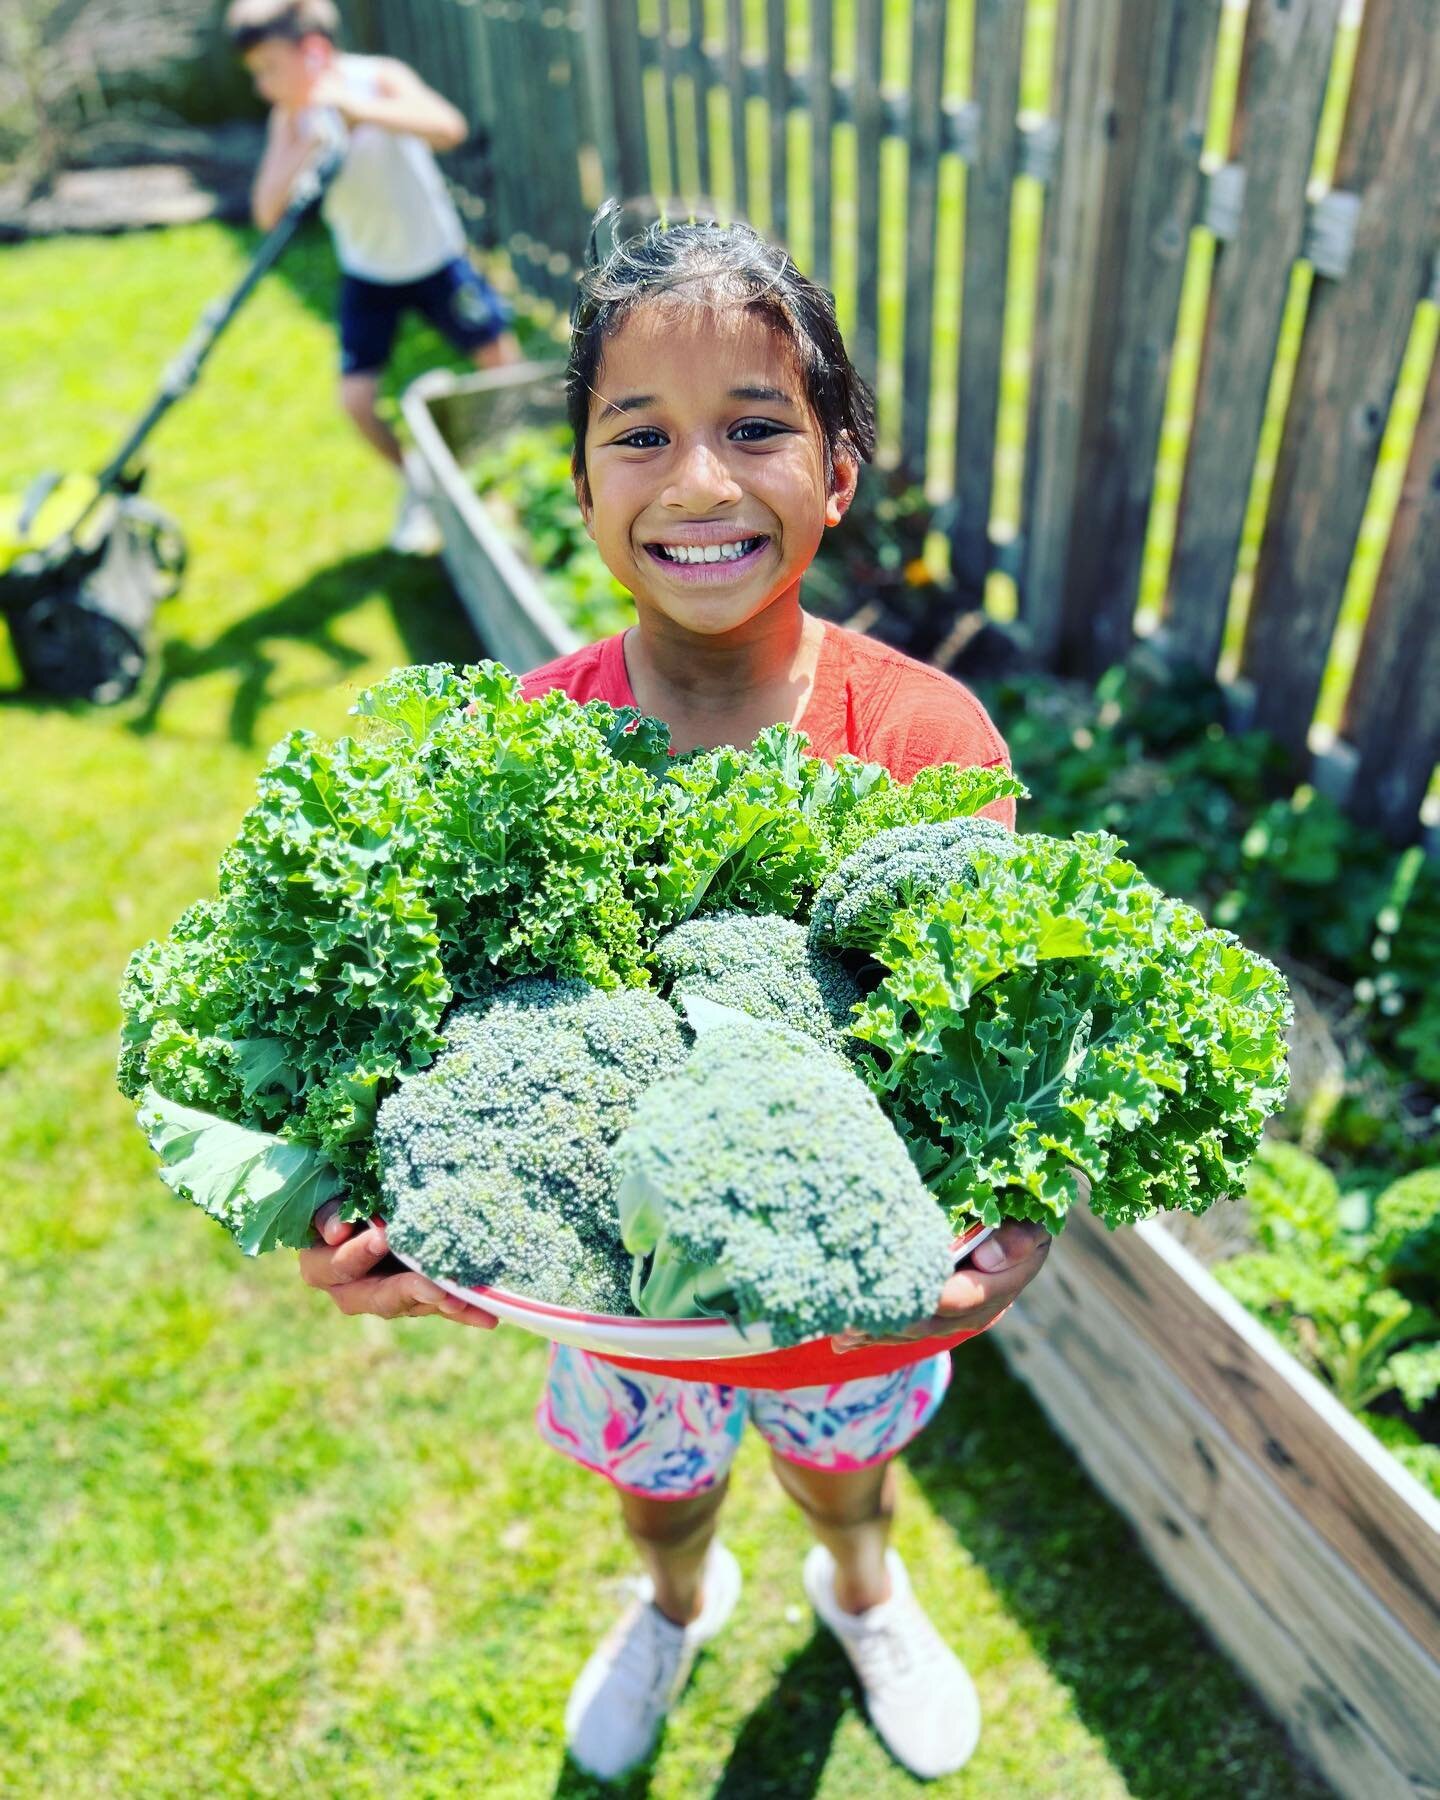 Had our first big harvest from our garden this weekend! 

Strawberries, kale, broccoli and lettuce 🥰 

#weekendoutside #homegarden #homegardening #familyfun #weekendfun #homegrown #homegrownfood #homegrownveggies #yum